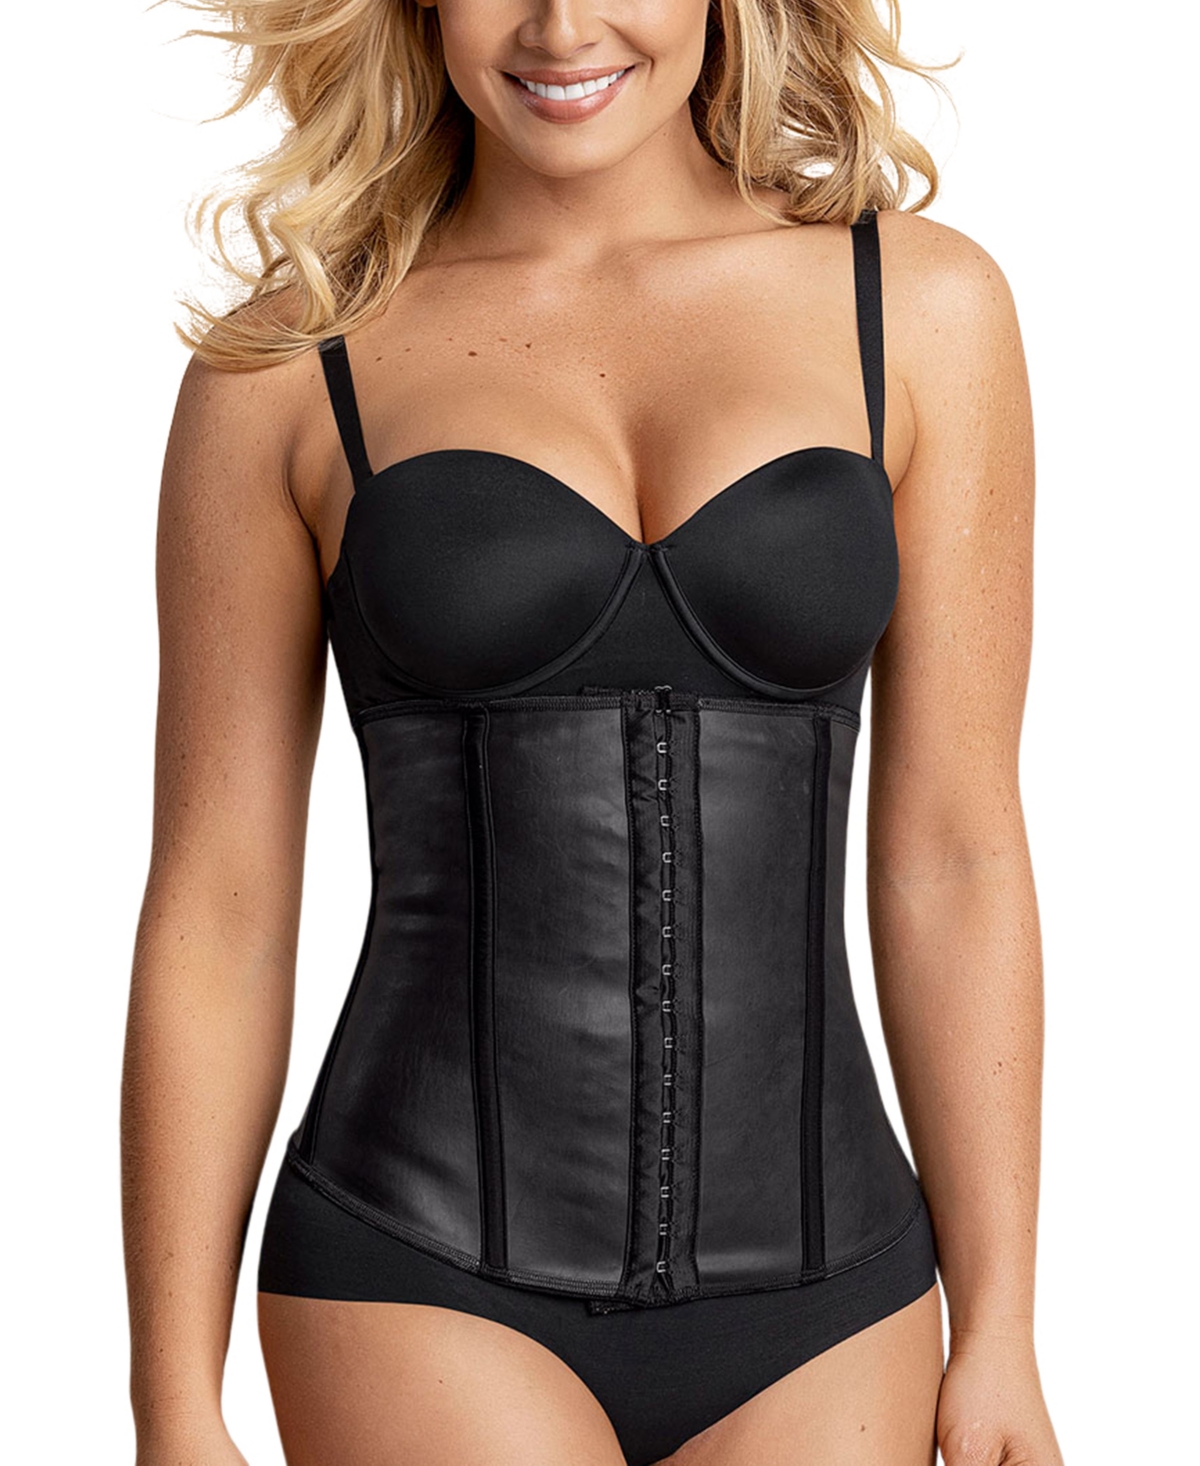 Women's Extra-Firm Compression, Latex Waist Trainer - Black